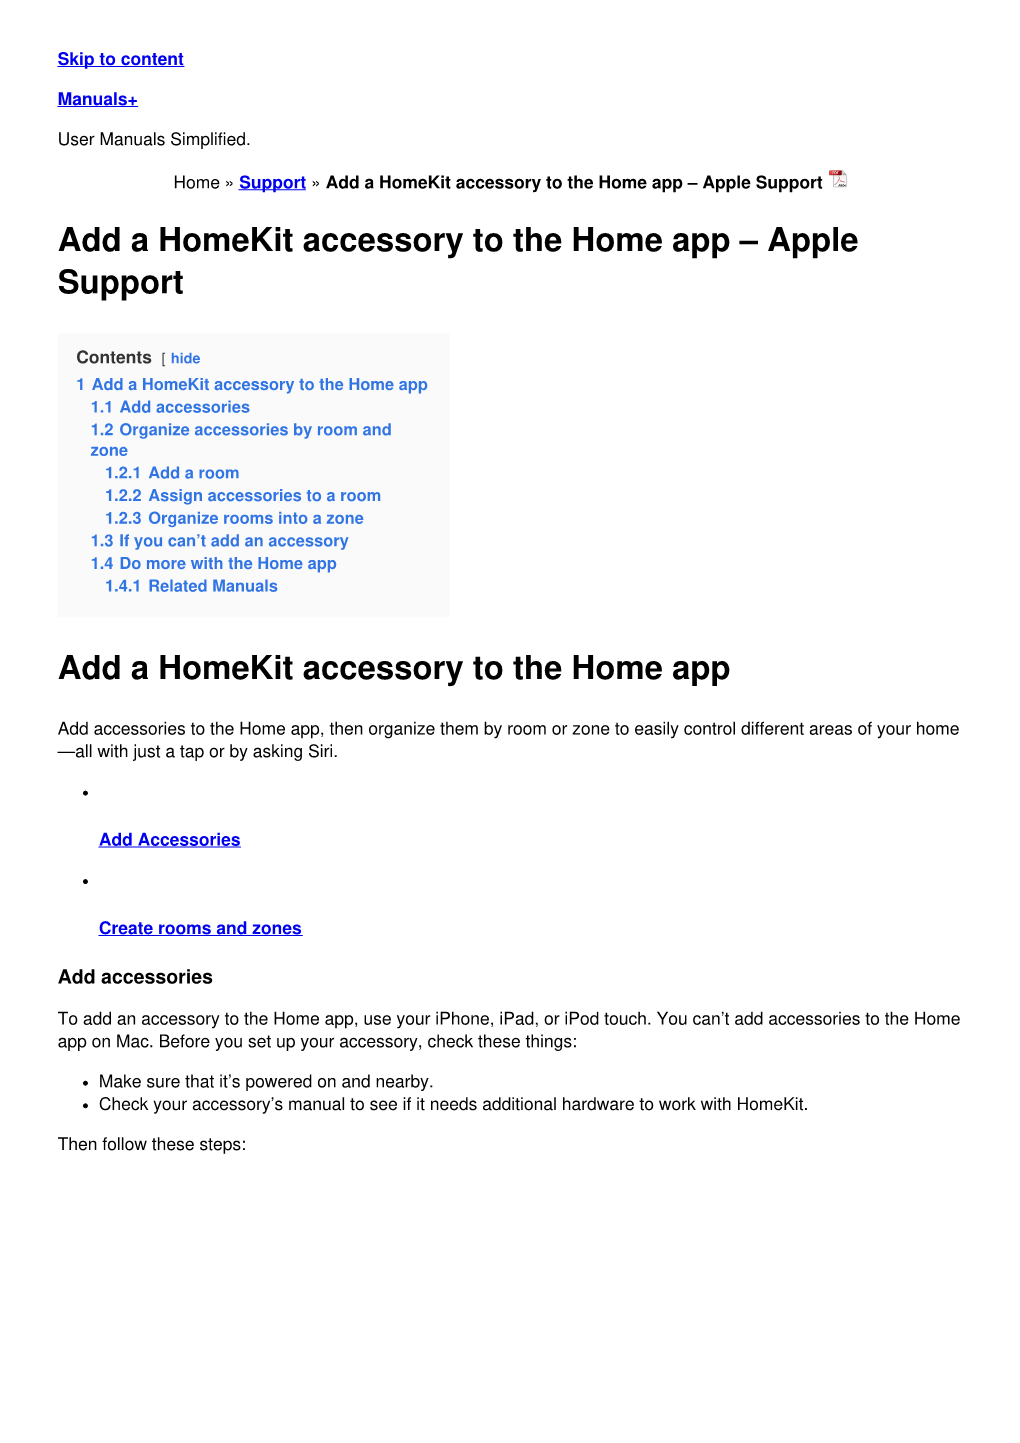 Add a Homekit Accessory to the Home App – Apple Support